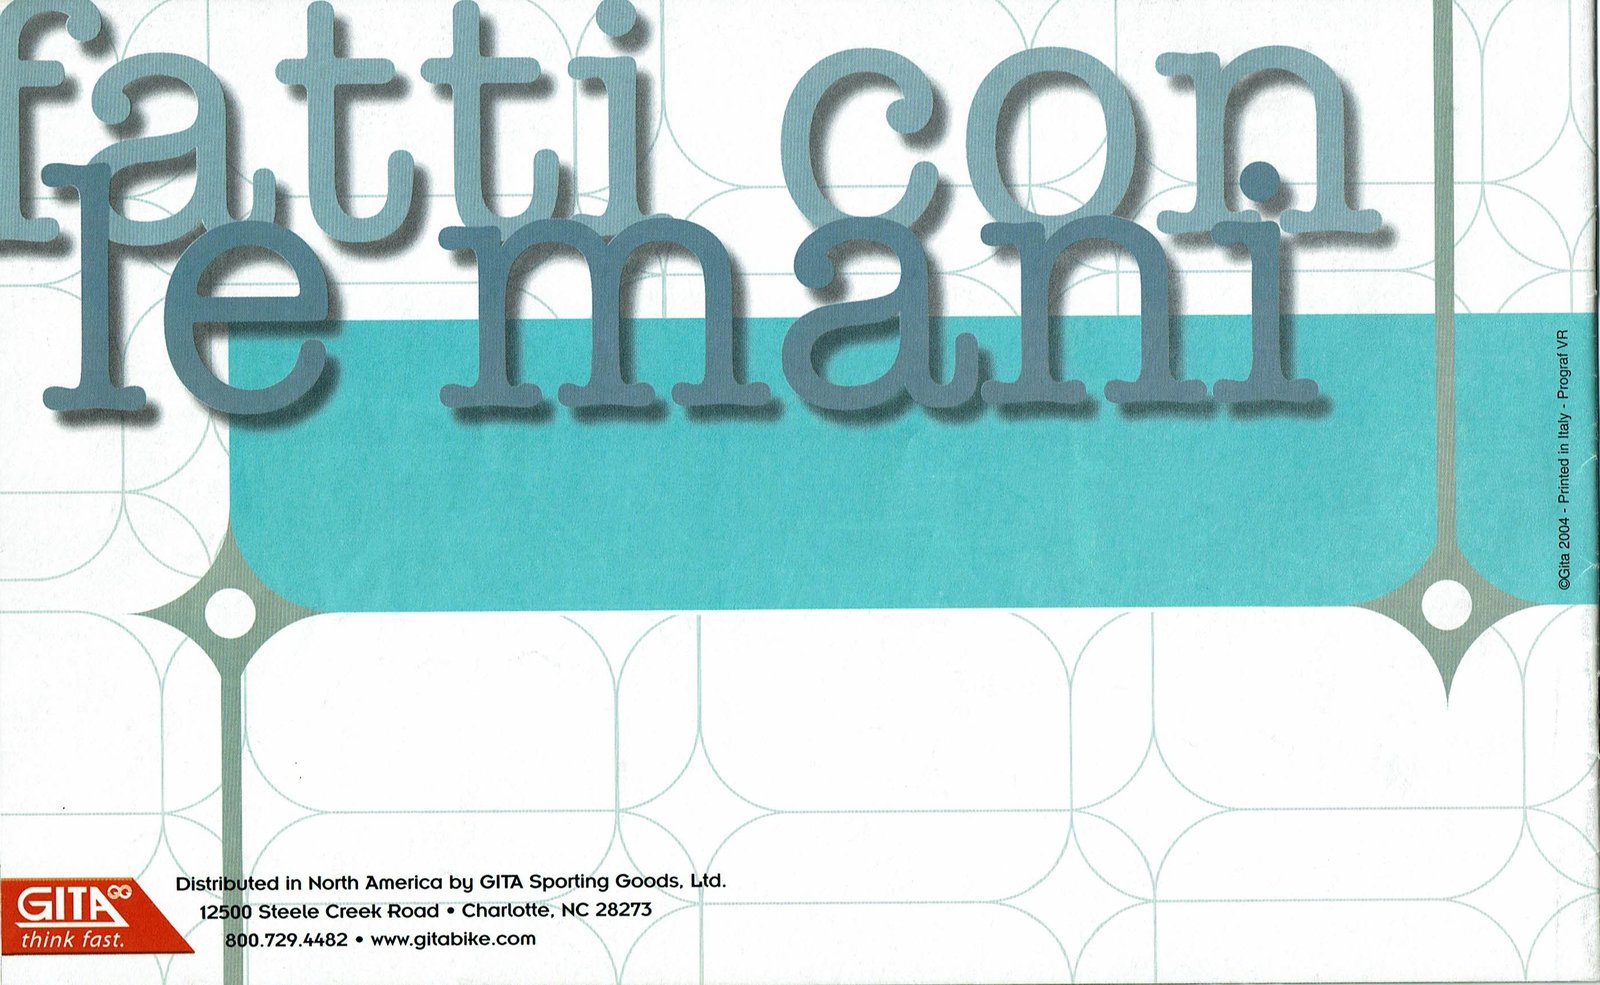 Back Cover from the 2005 Pegoretti catalog